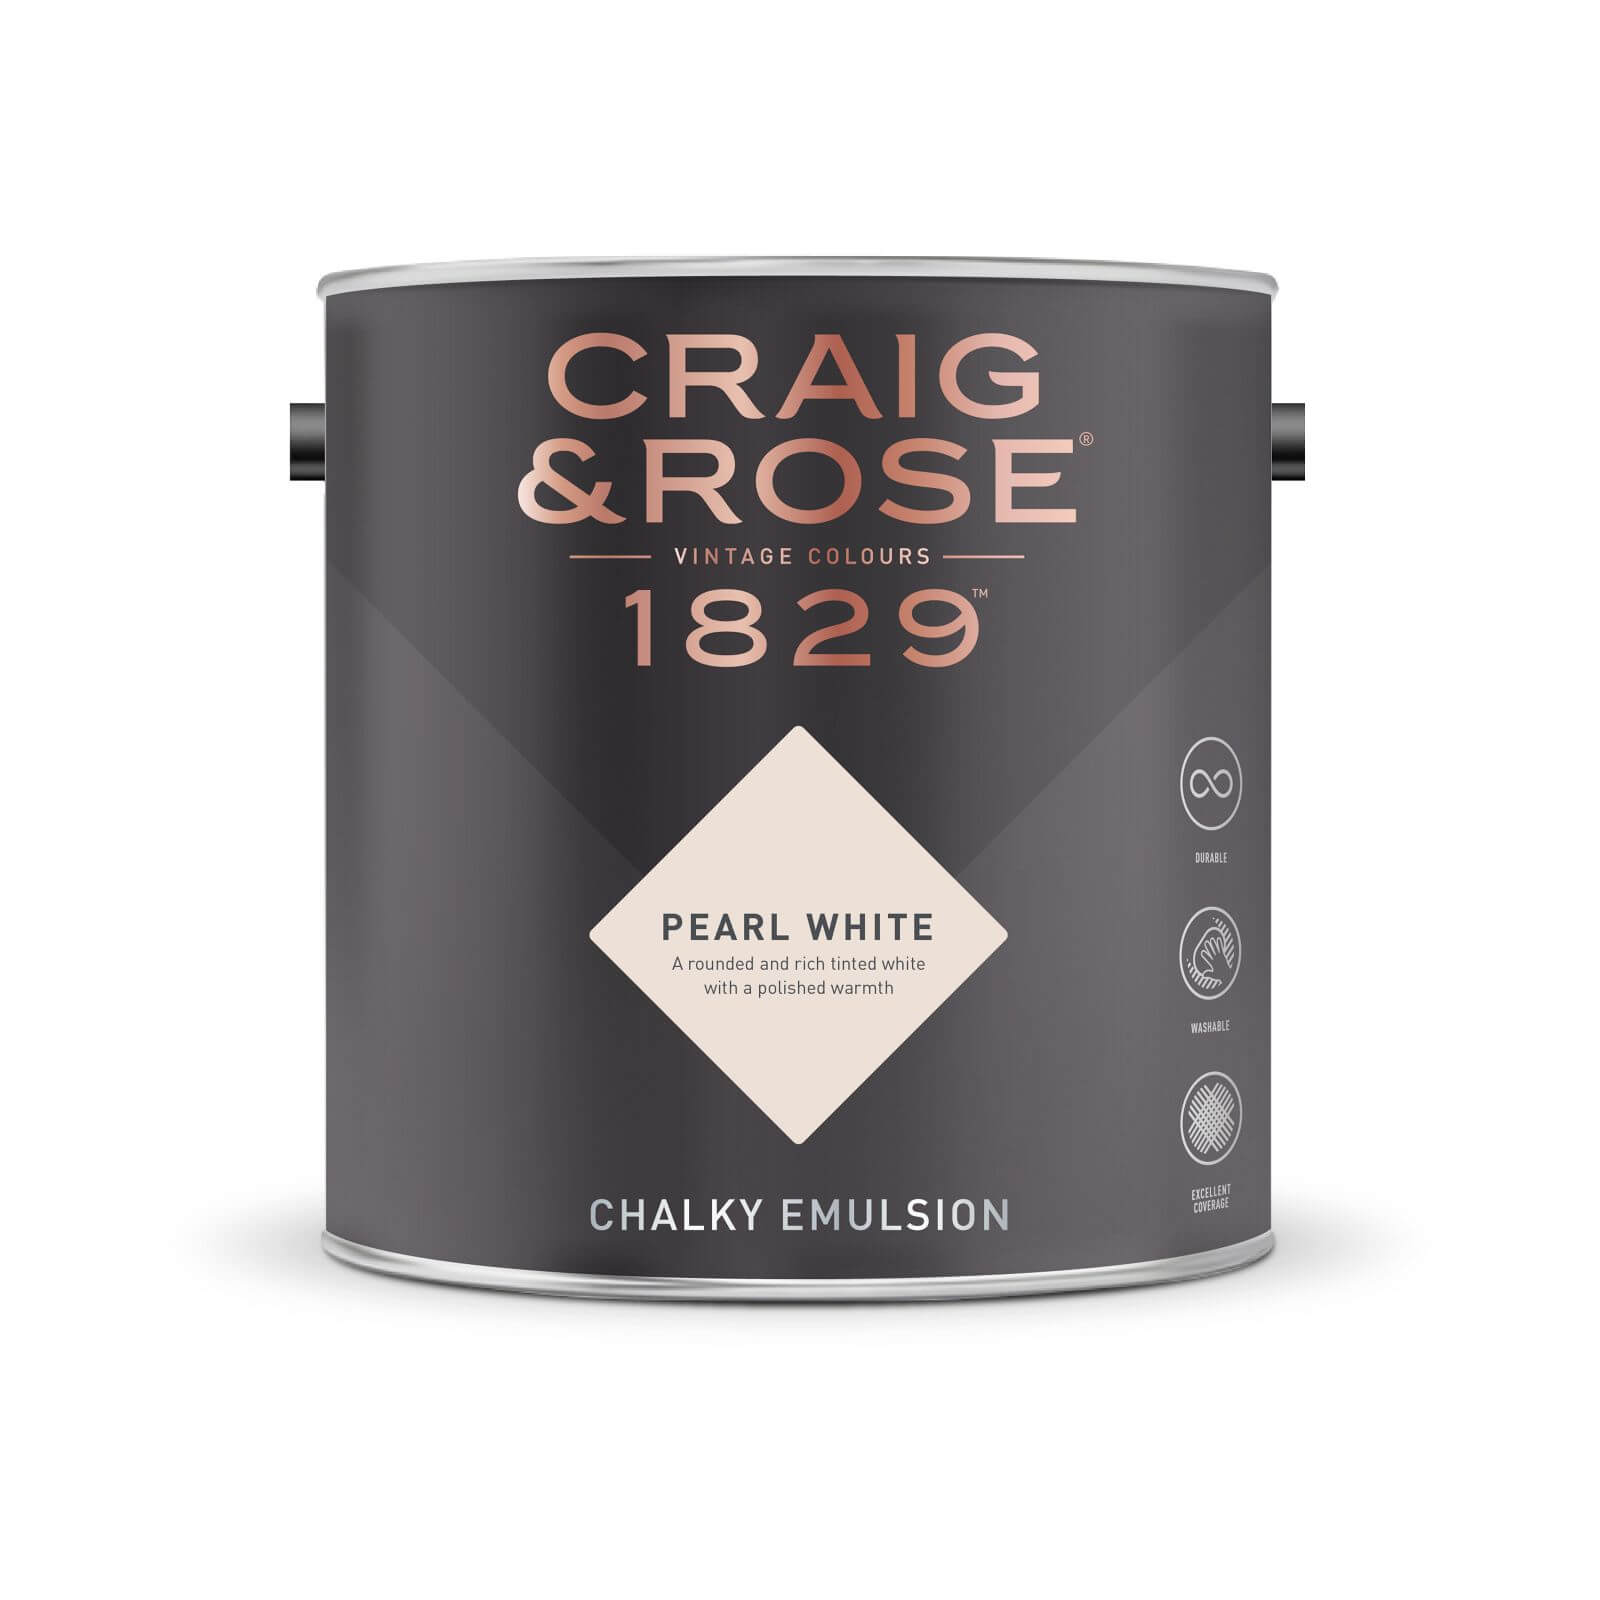 Craig & Rose 1829 Chalky Emulsion Paint Pearl White - Tester 50ml